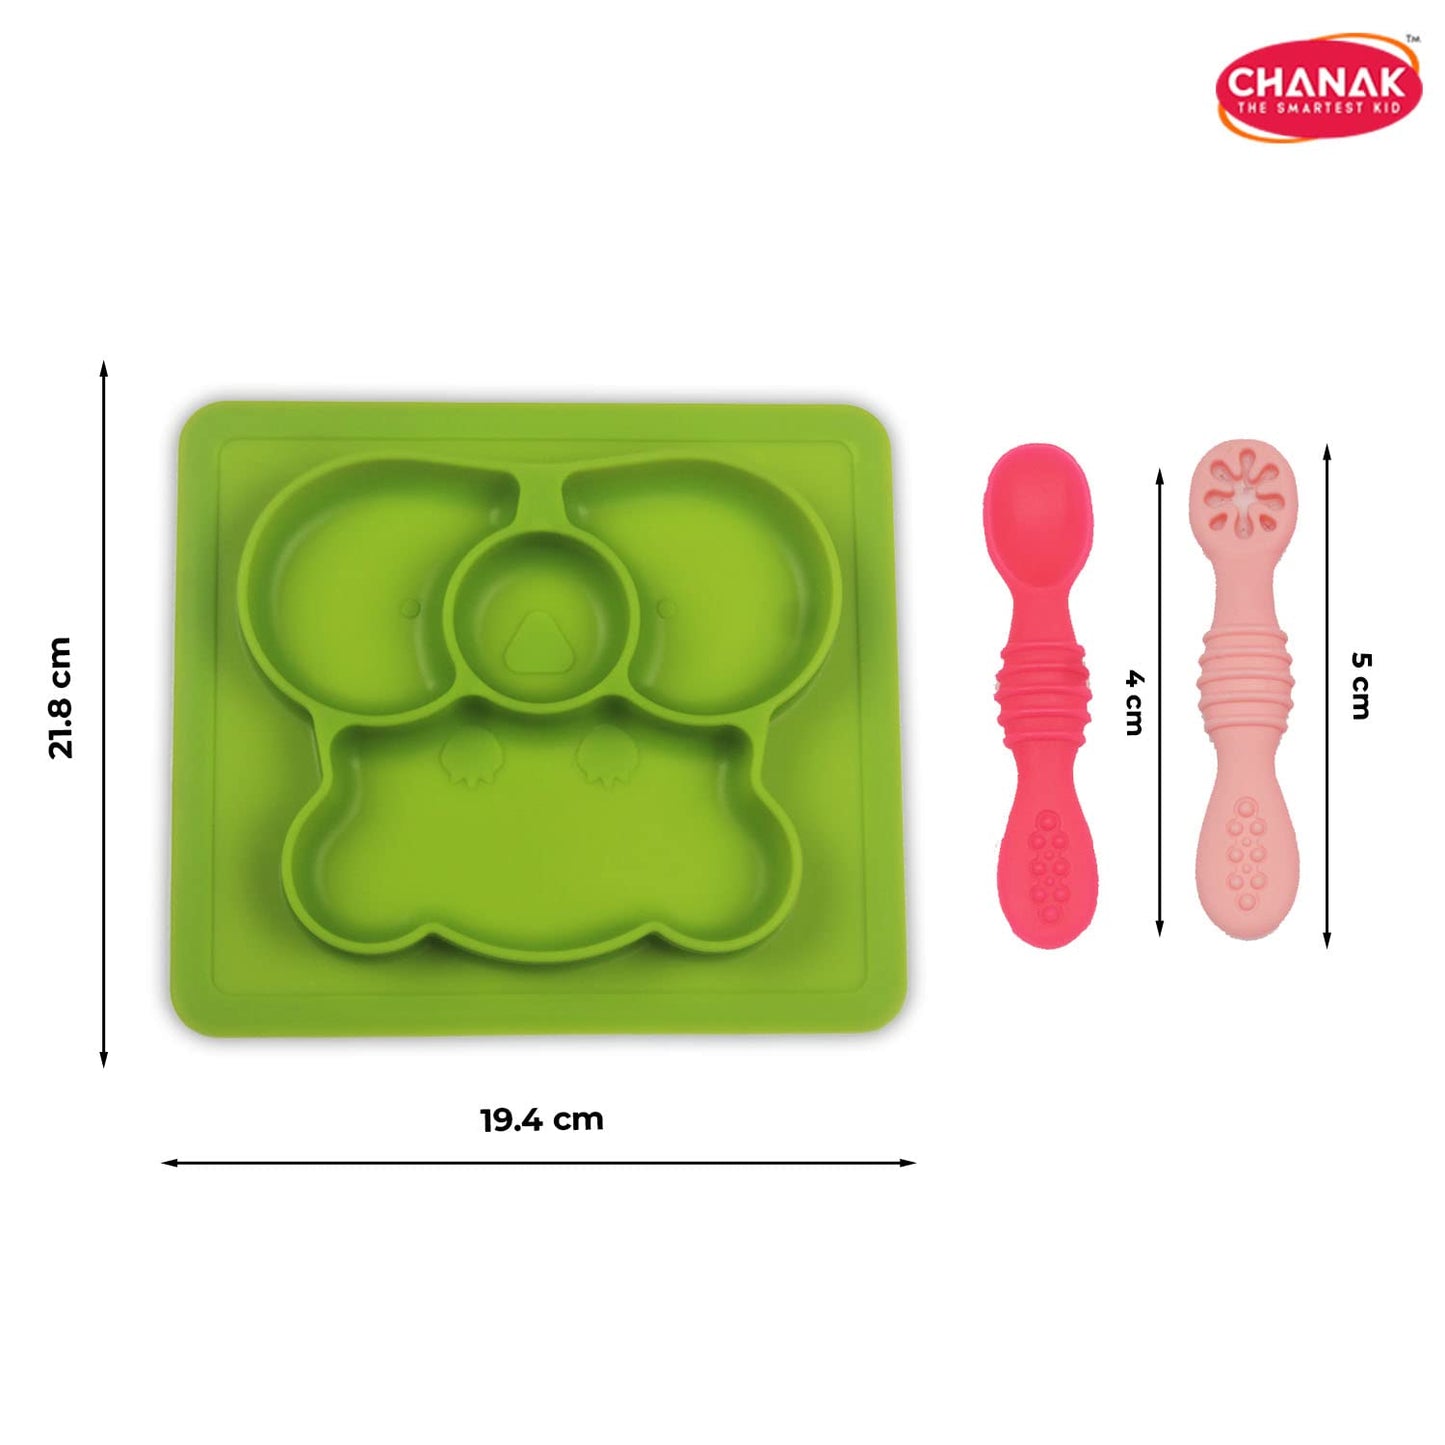 Chanak Baby Food Tray - Silicon Plate with Multiple Compartments & Two Spoons (Light Green)